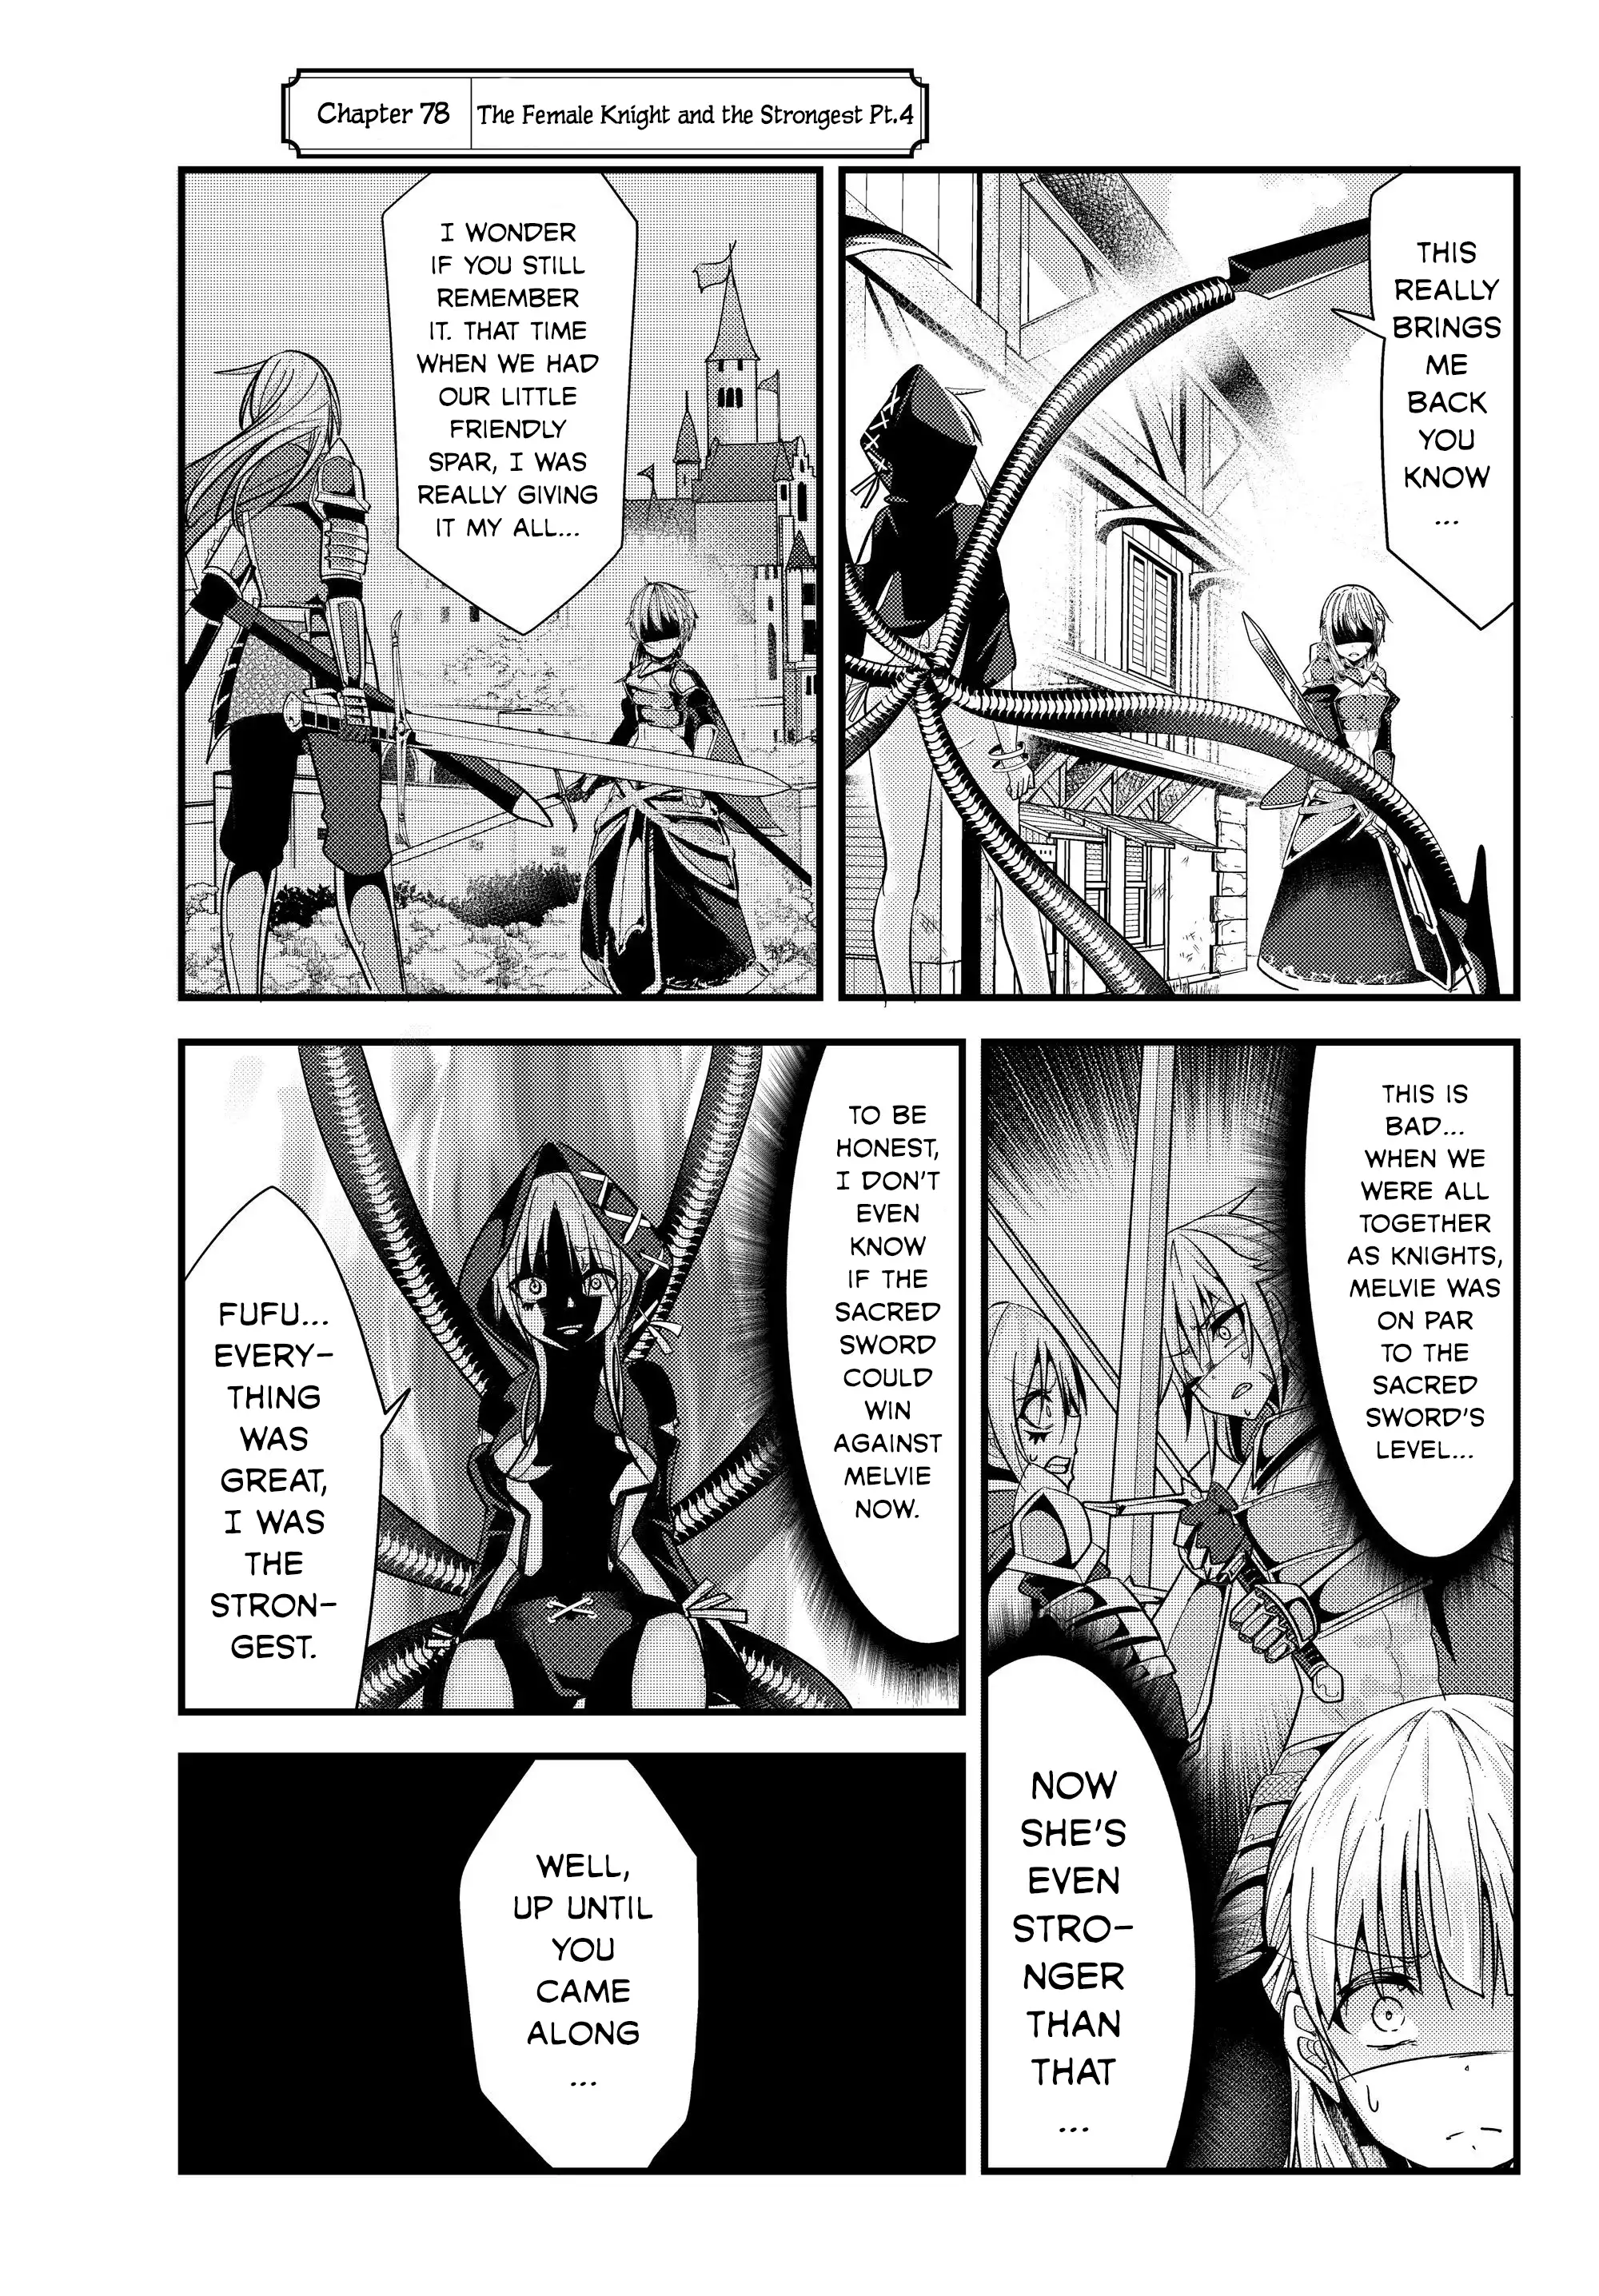 A Story About Treating a Female Knight, Who Has Never Been Treated as a Woman, as a Woman - Chapter 78 Page 1